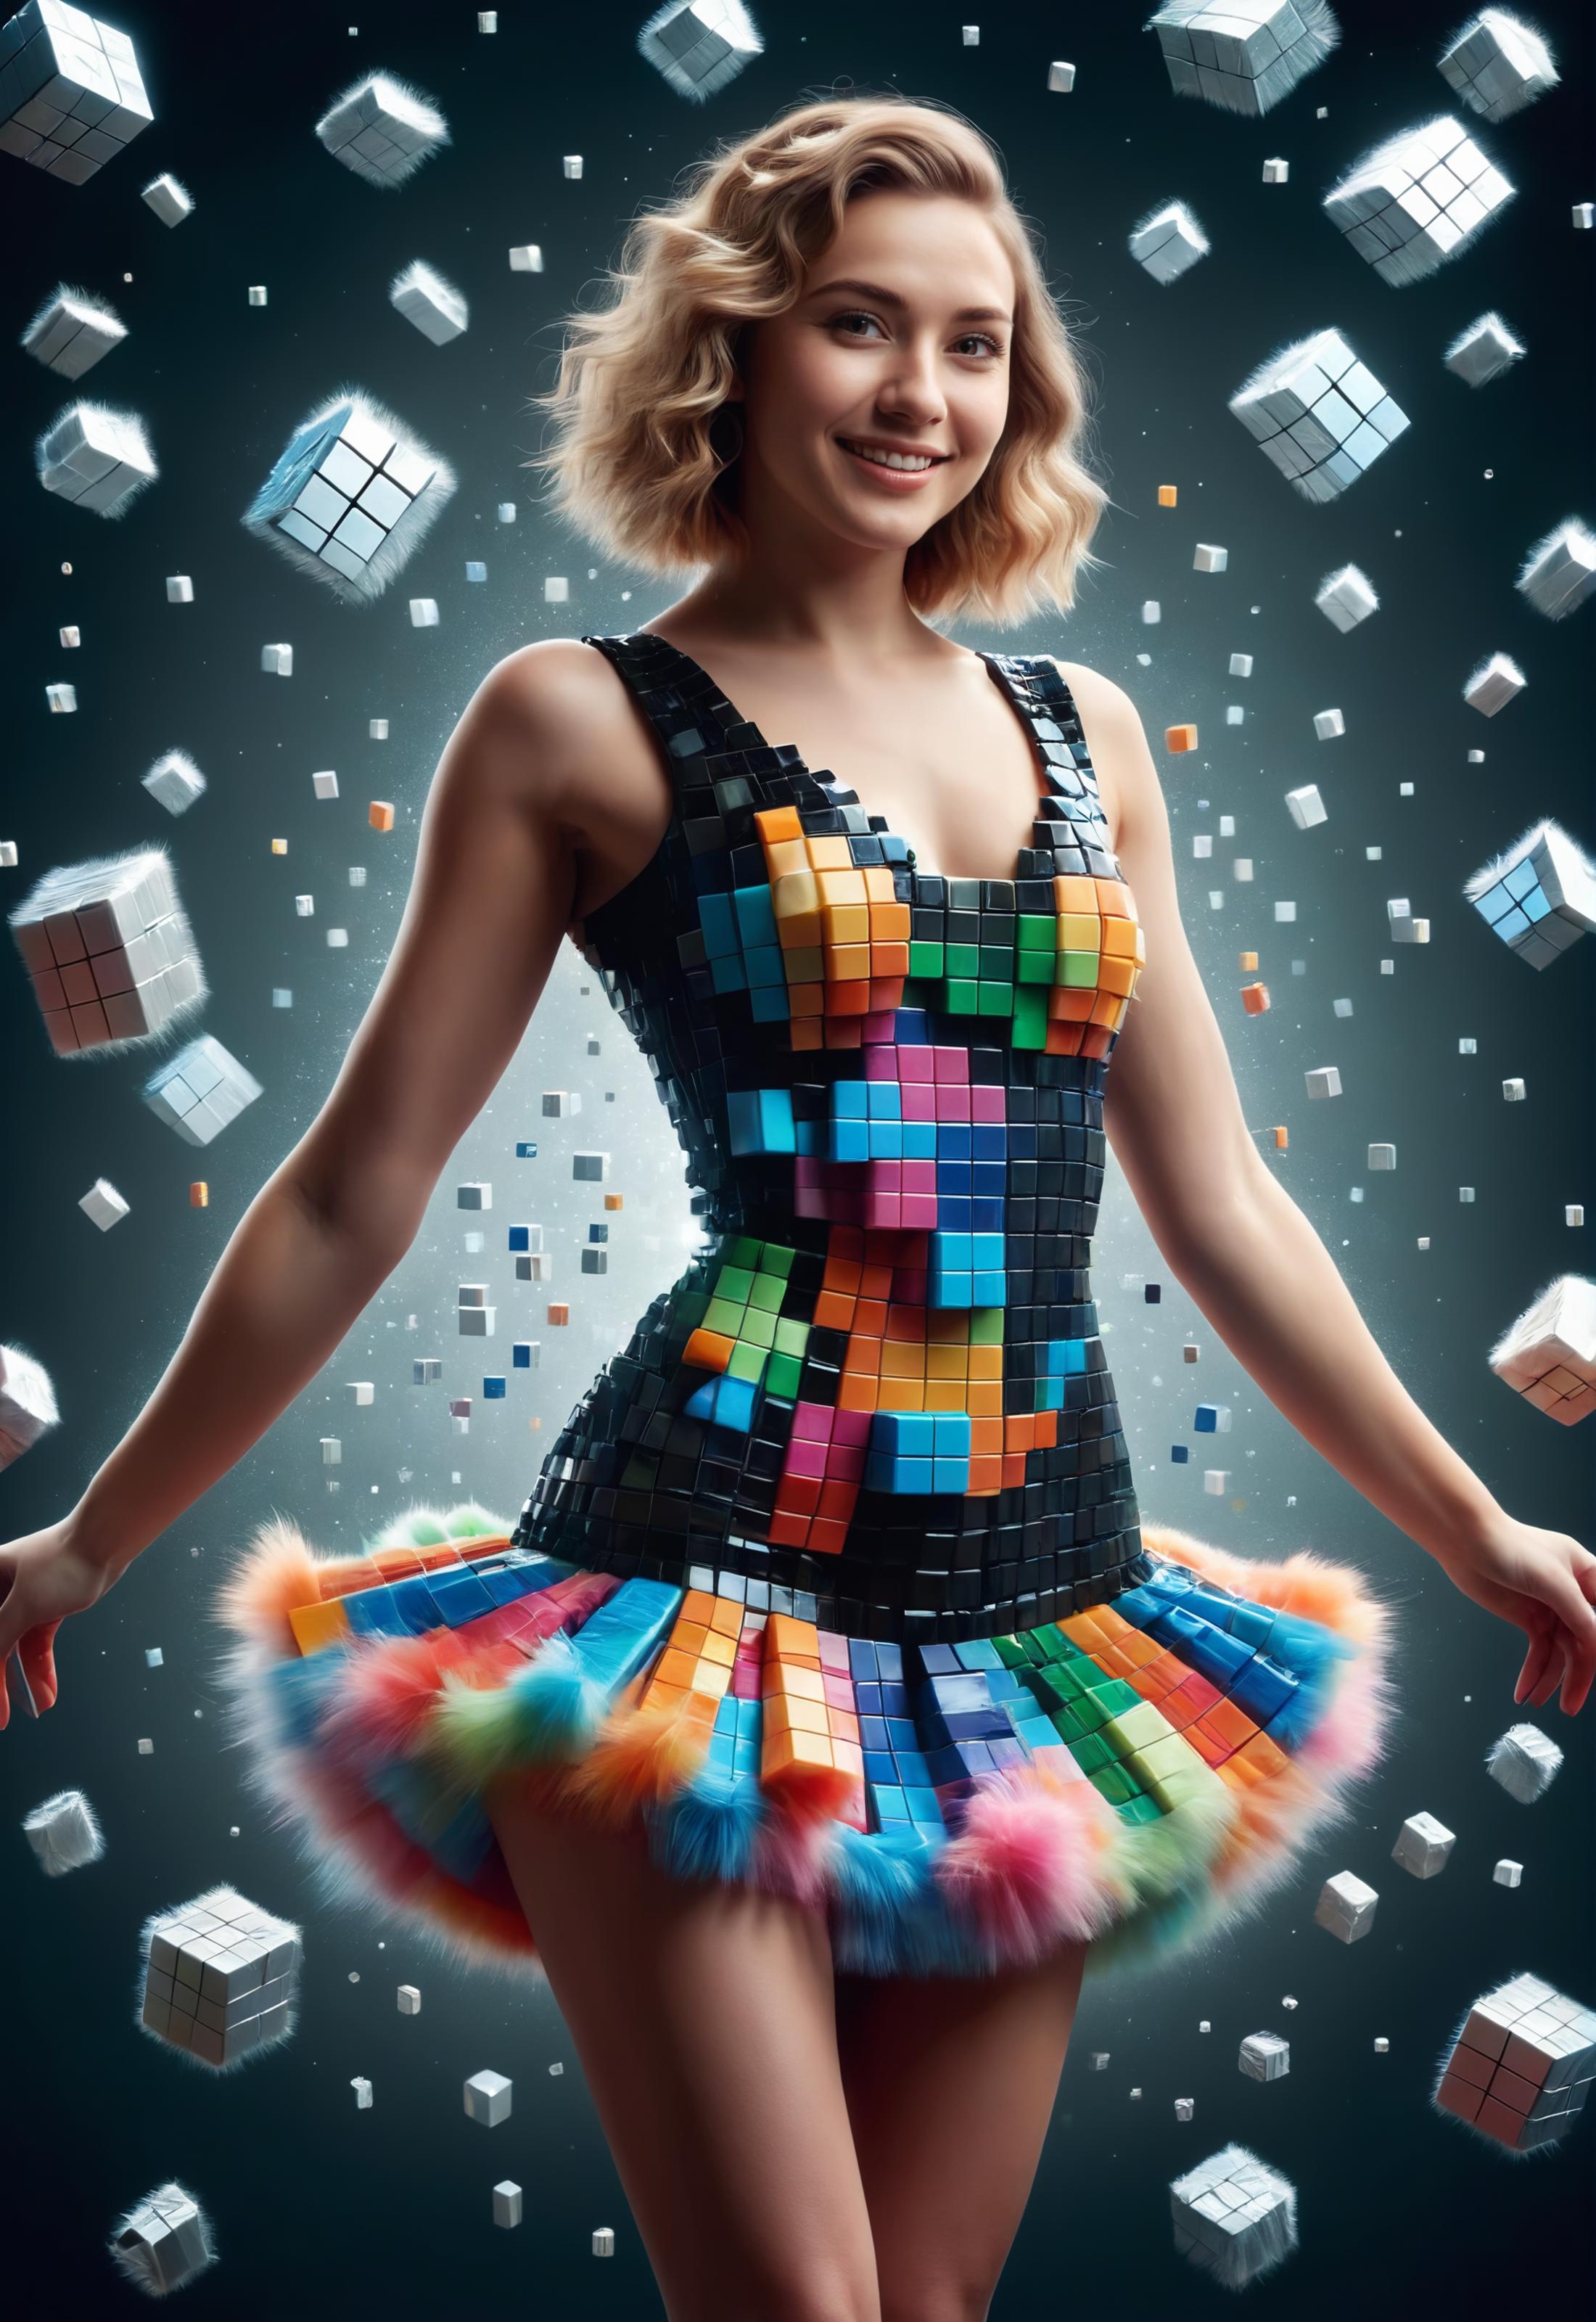 Woman wearing a dress made of Rubik's cubes posing for a photo.